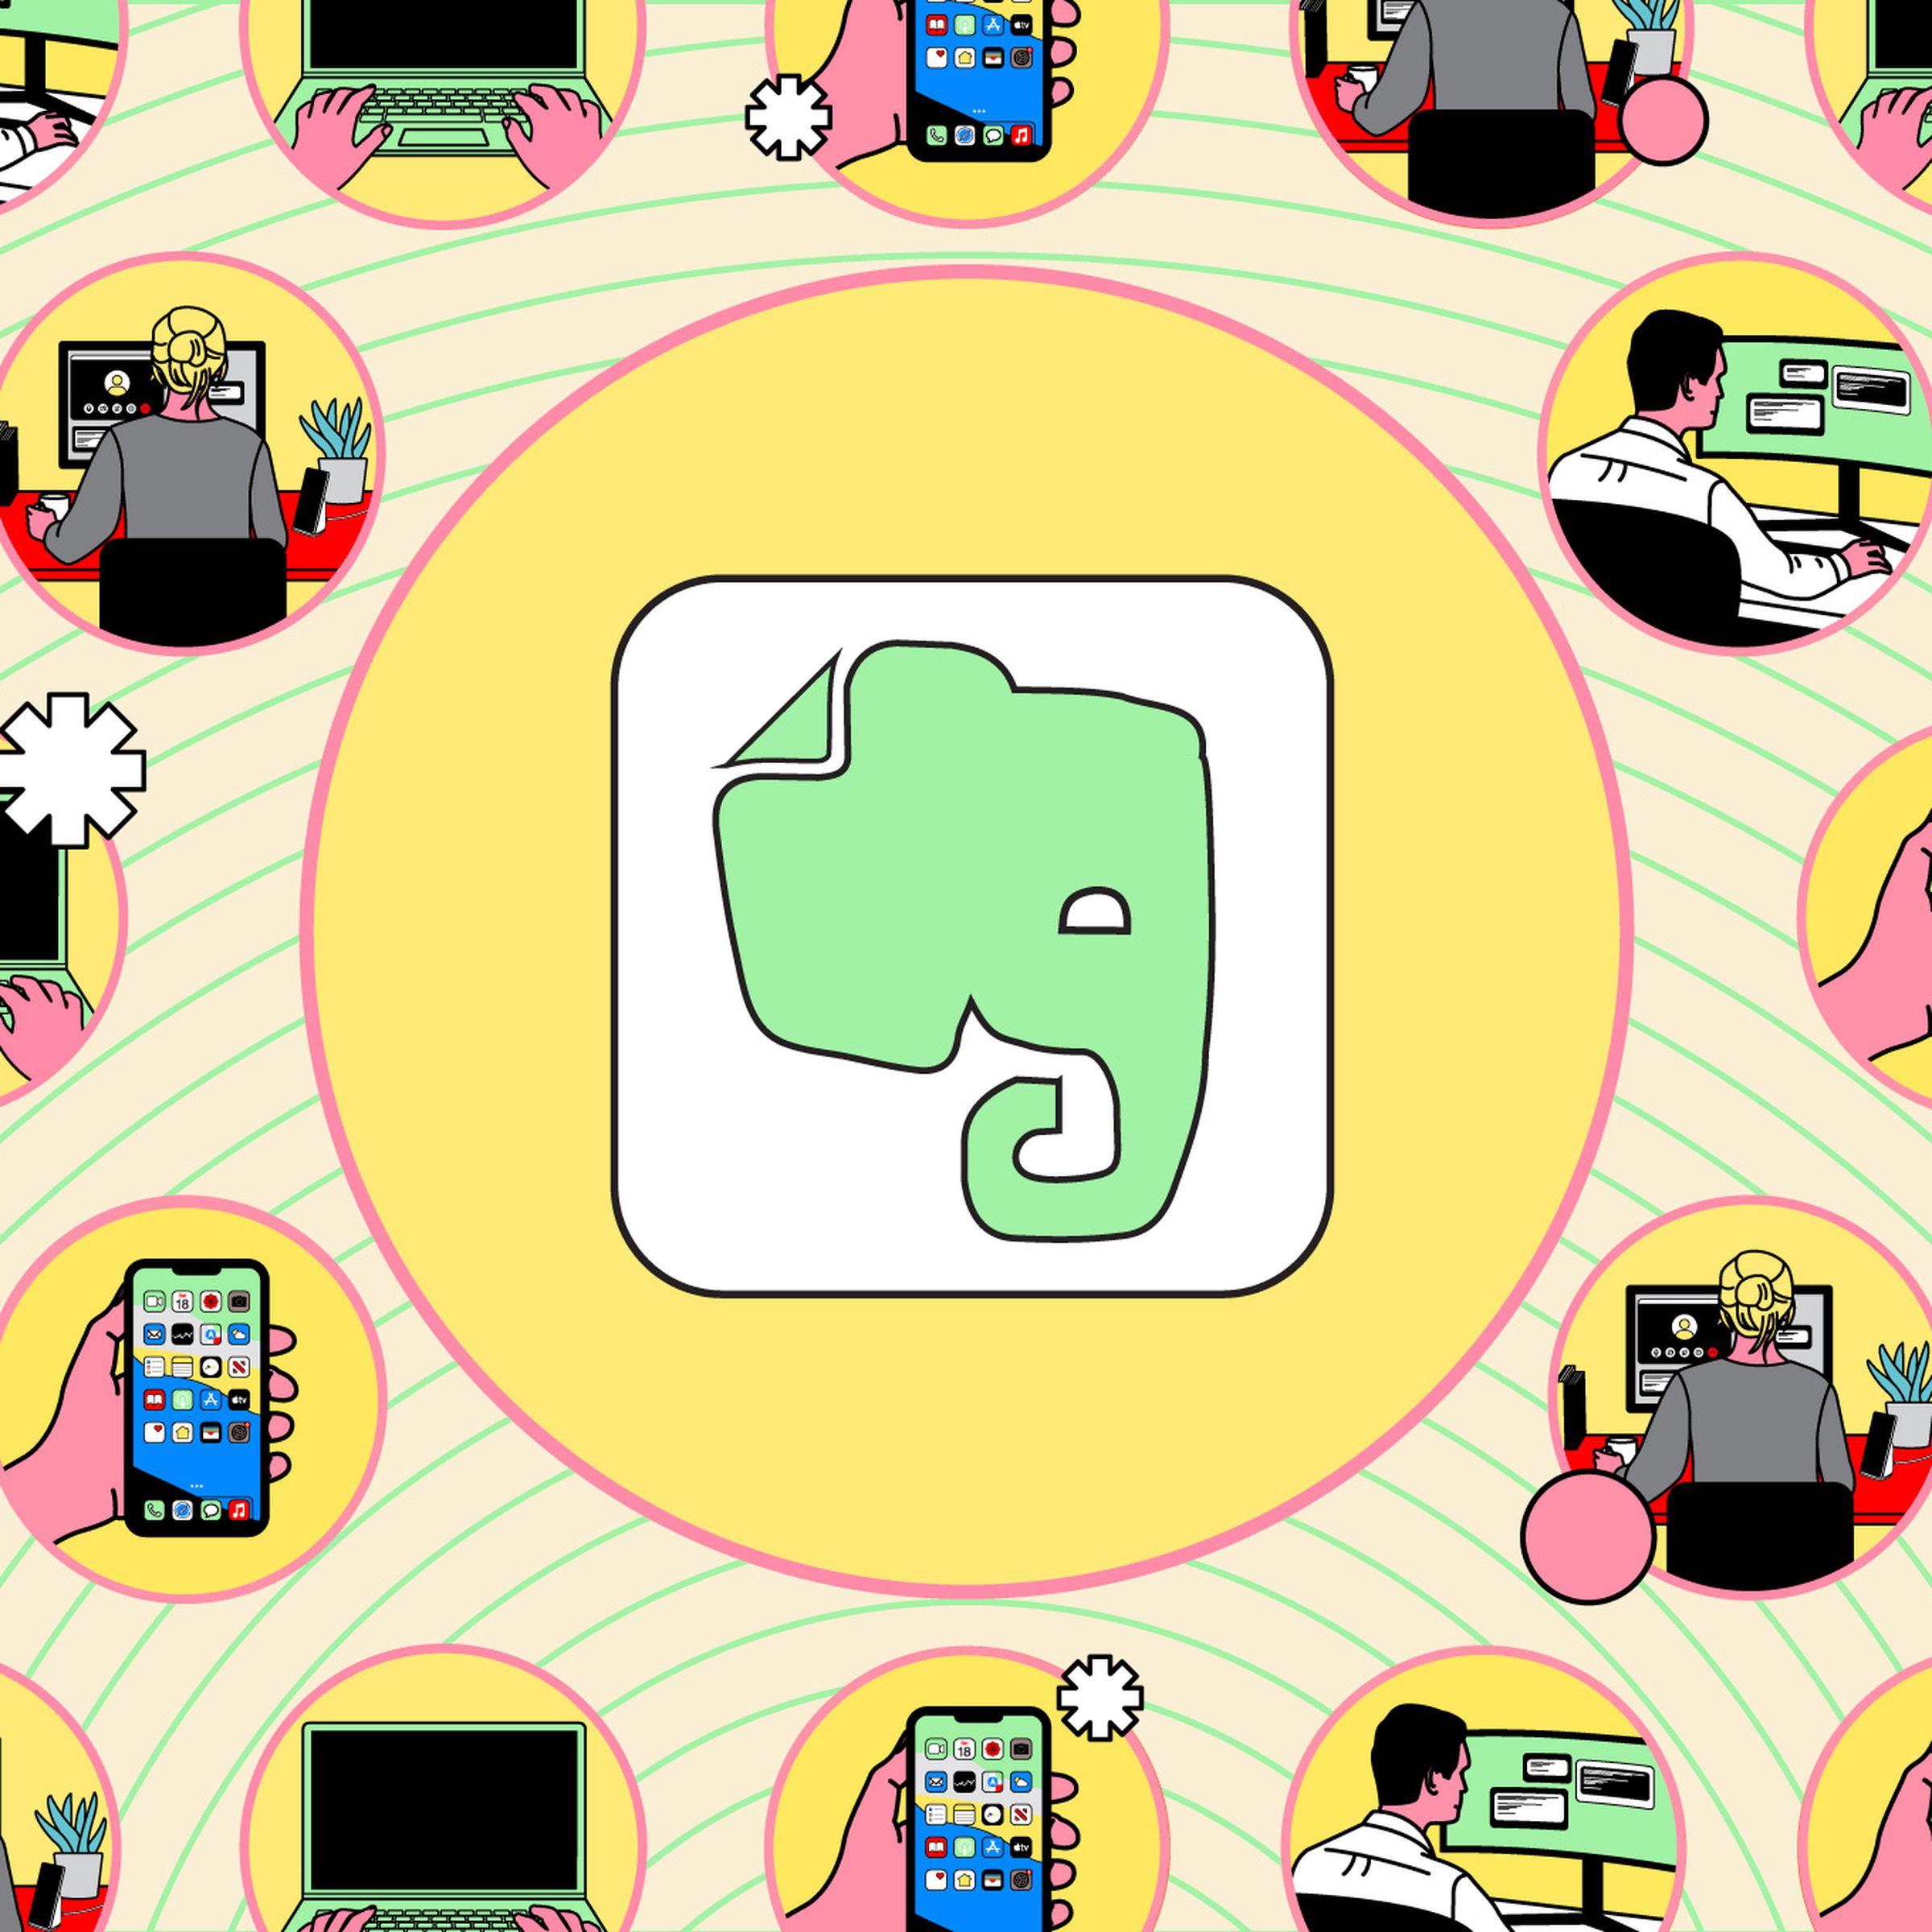 Green elephant head within illustrated background.